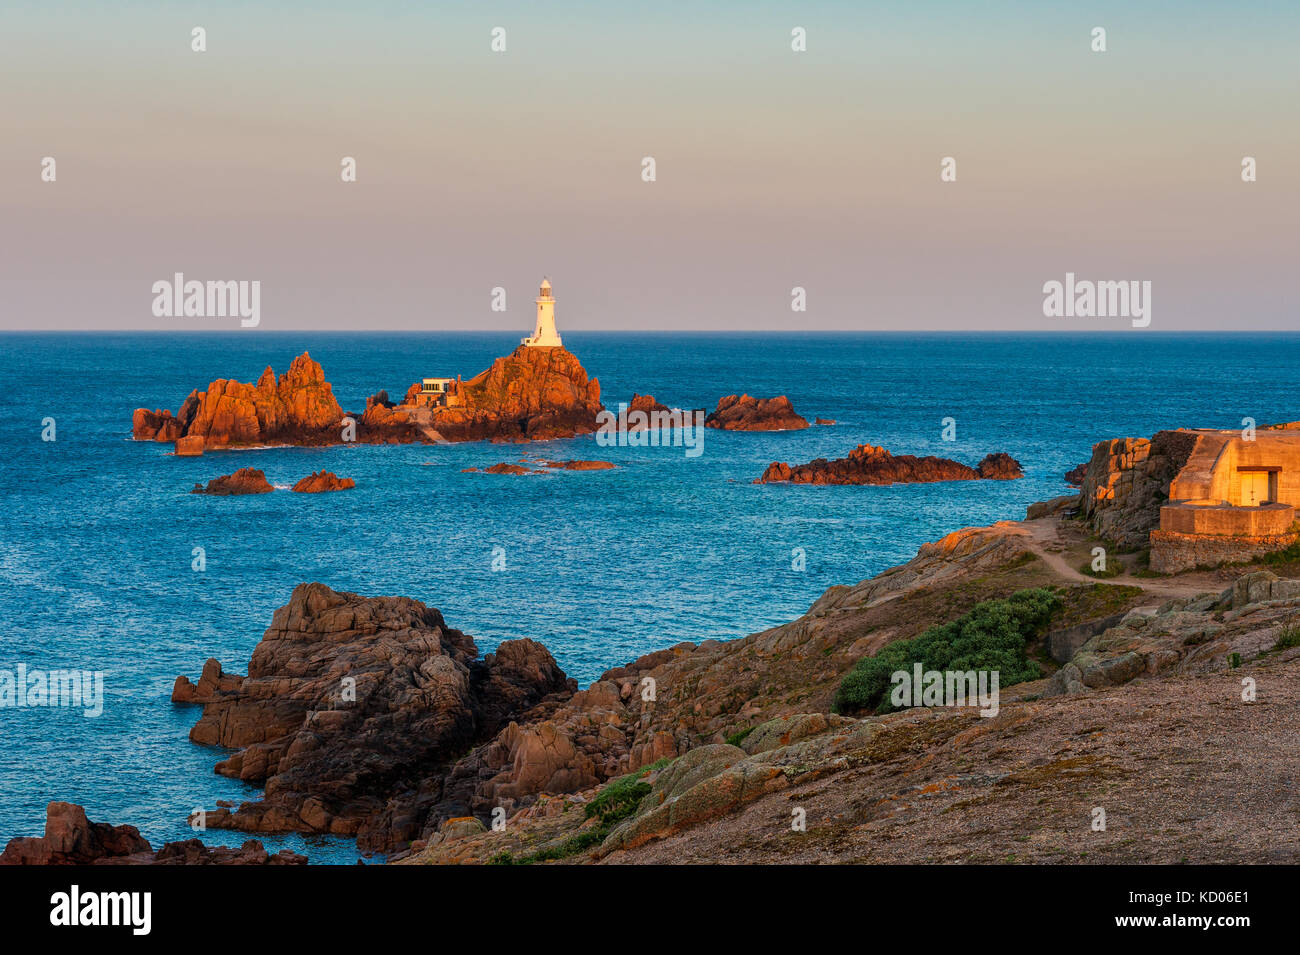 La Corbiere Lighthouse in Saint Helier, Jersey, Channel Islands, UK at sunrise and high tide Stock Photo